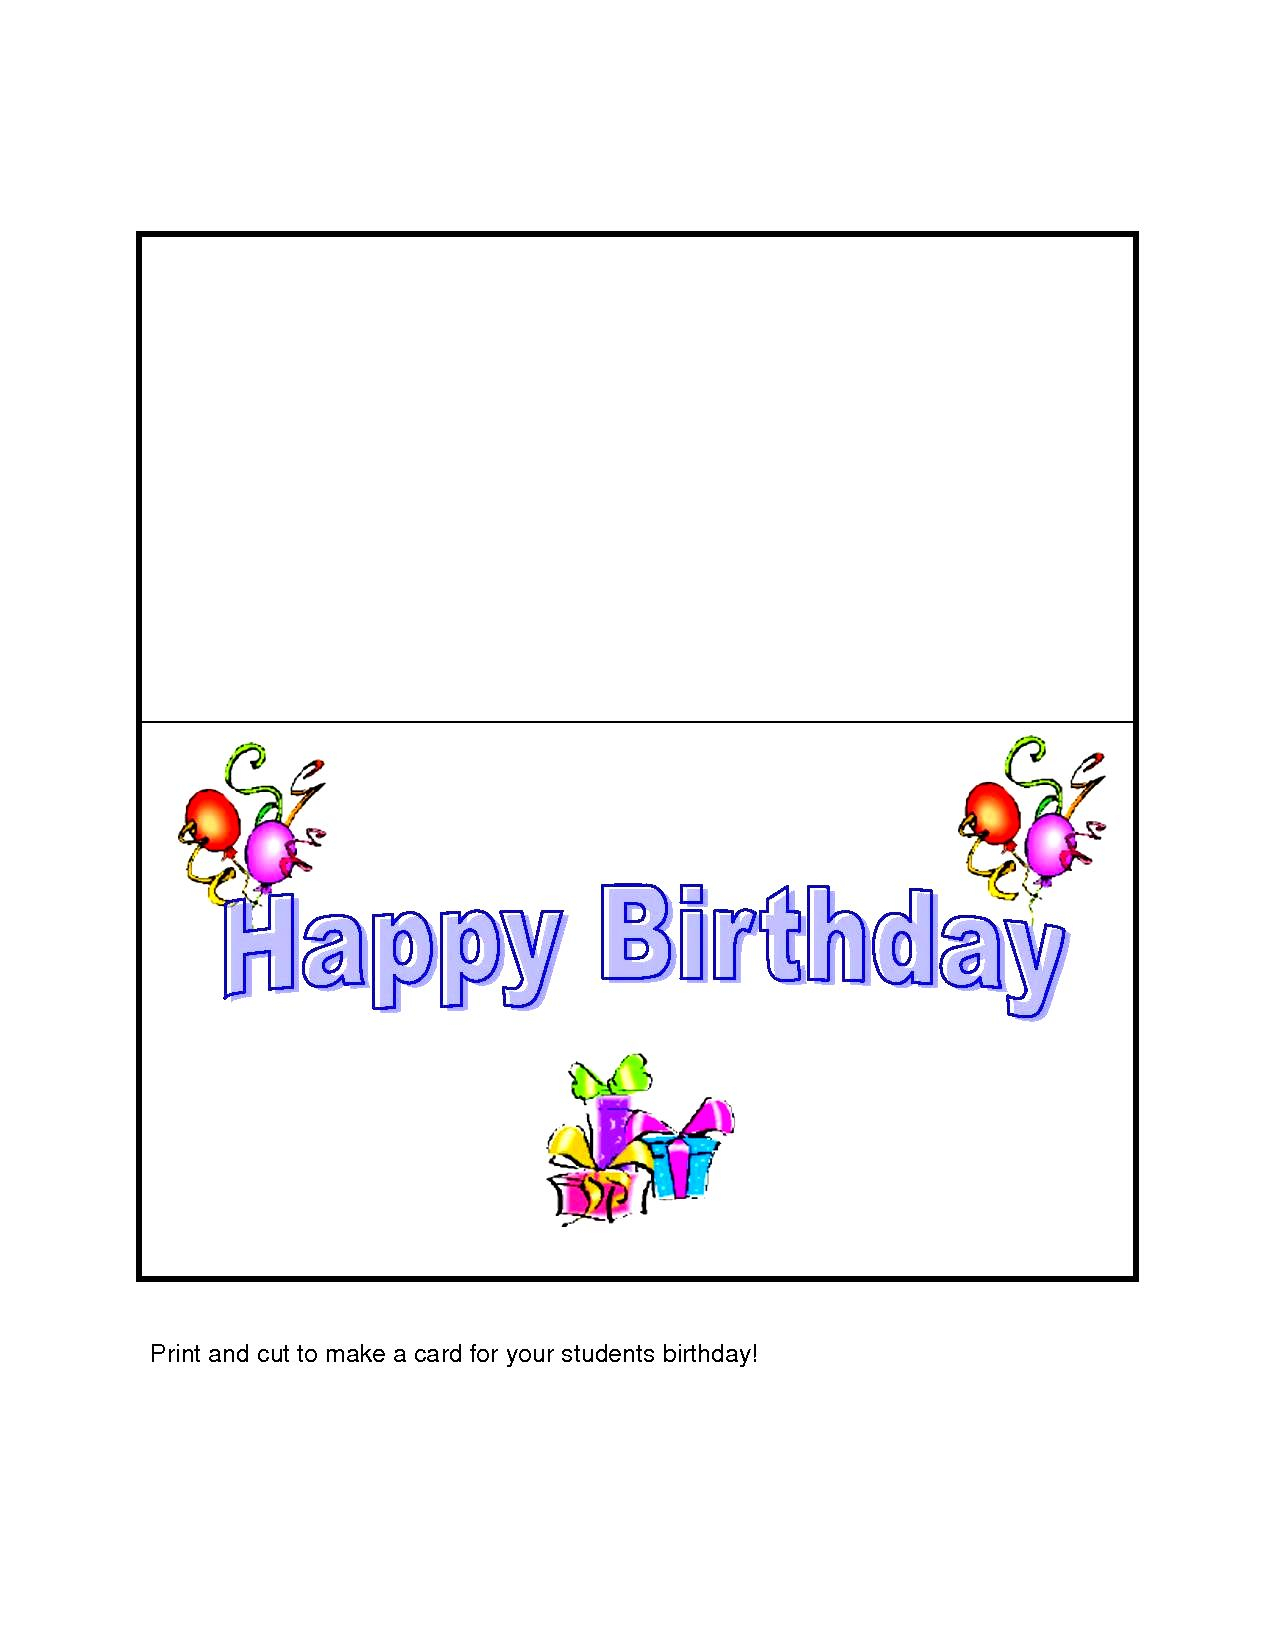 17 Images Of Birthday Party Card Template | Splinket With Regard To Microsoft Word Birthday Card Template